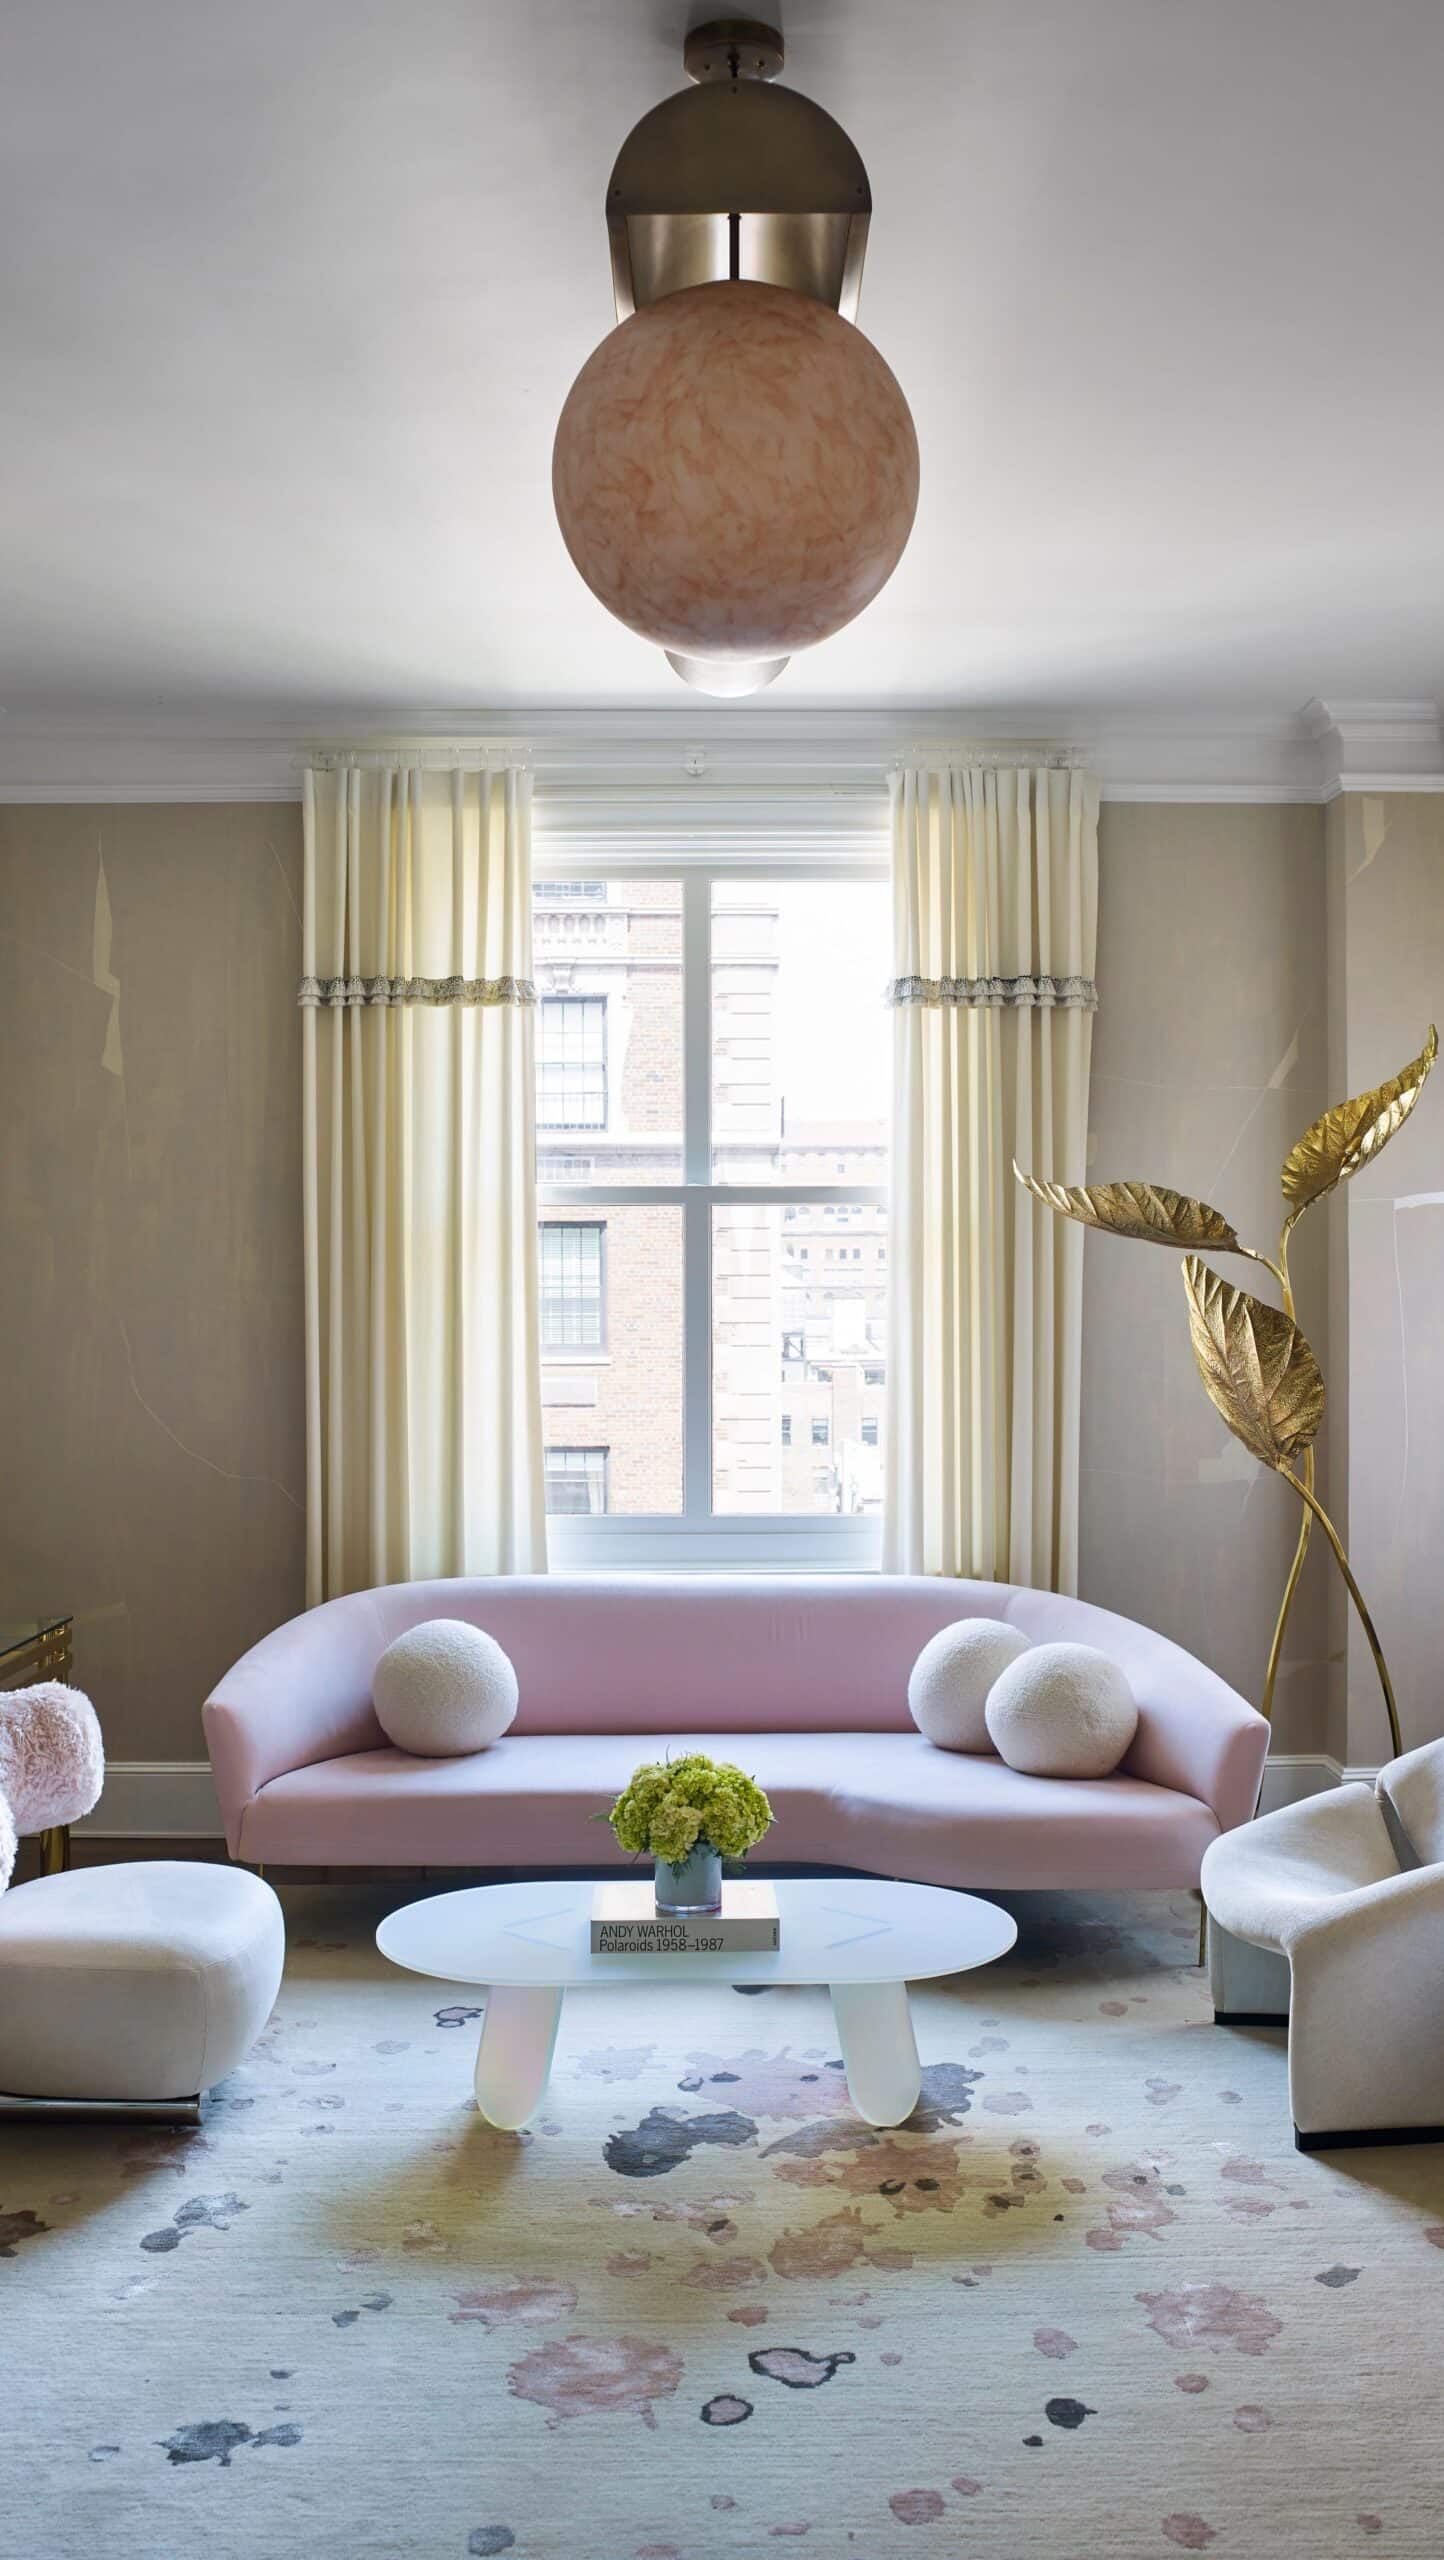 Tour a Park Avenue Apartment with Perfect Pops of Pink